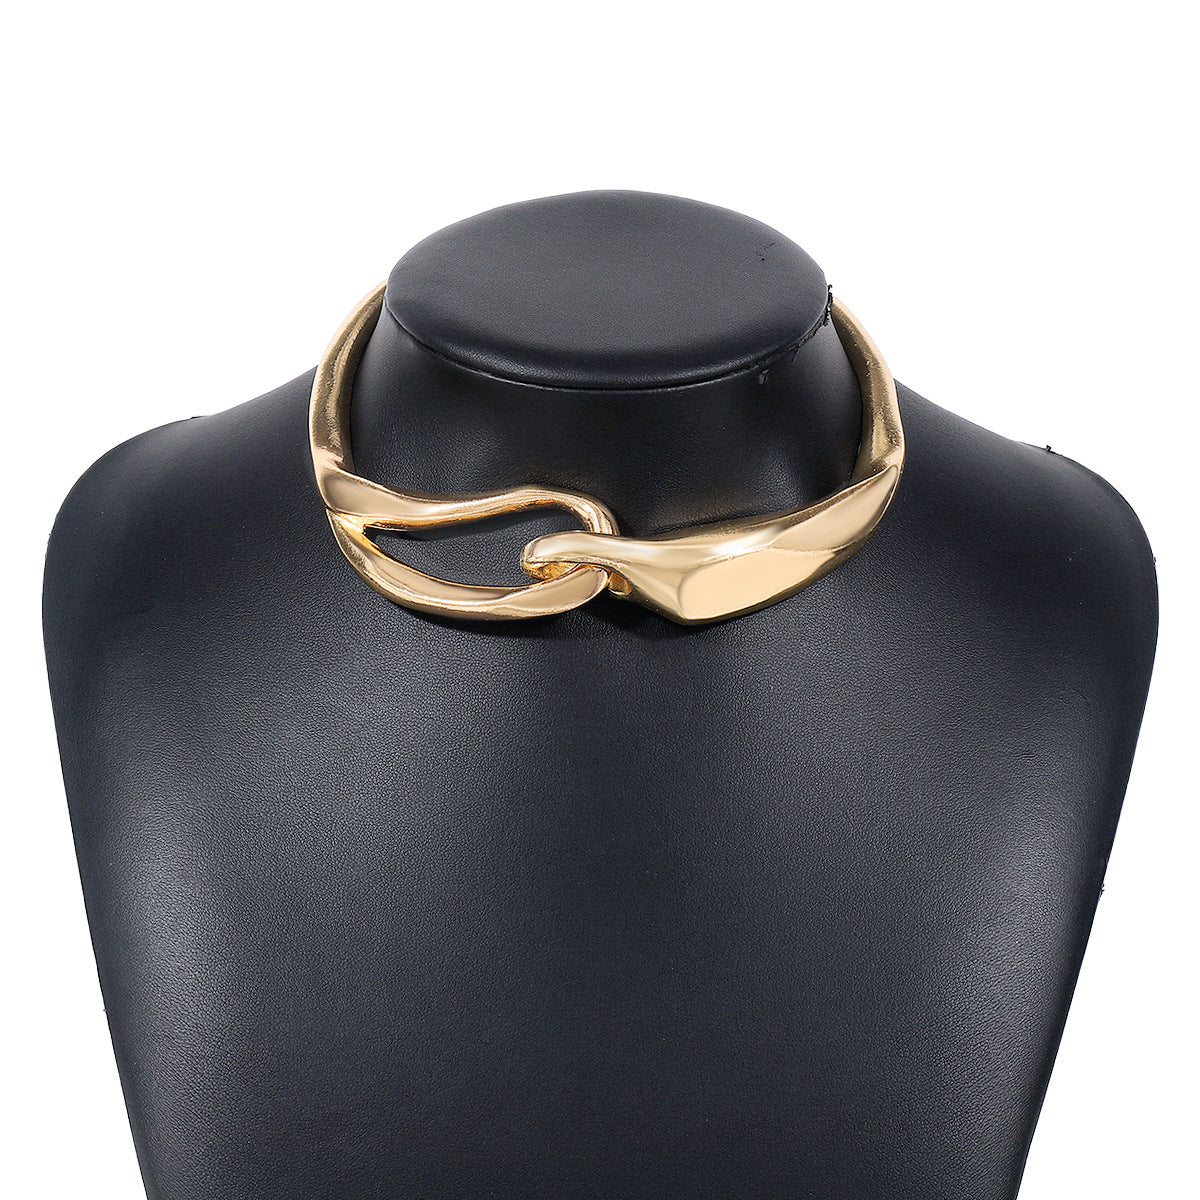 Exaggerated metal style three-dimensional buckle necklace